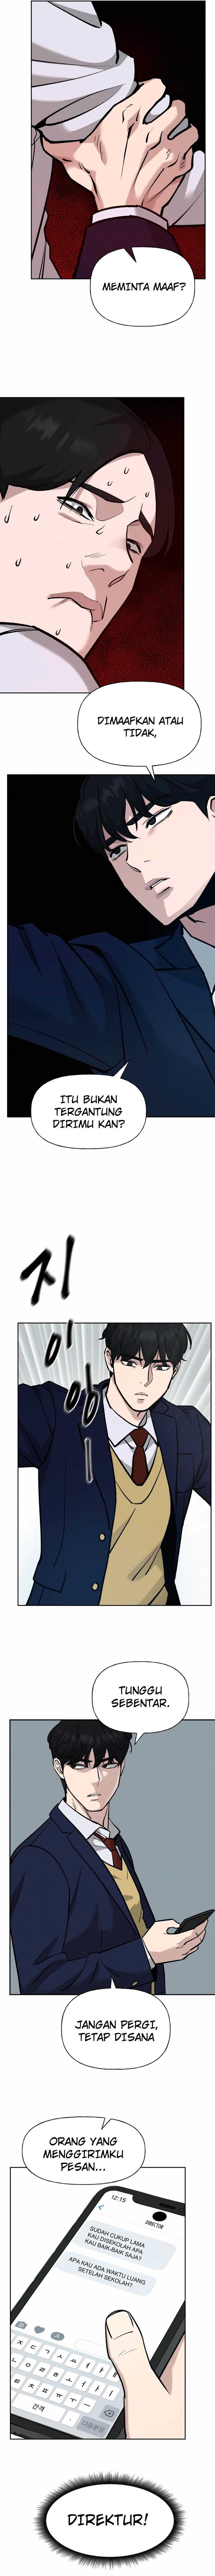 The Bully In Charge Chapter 06